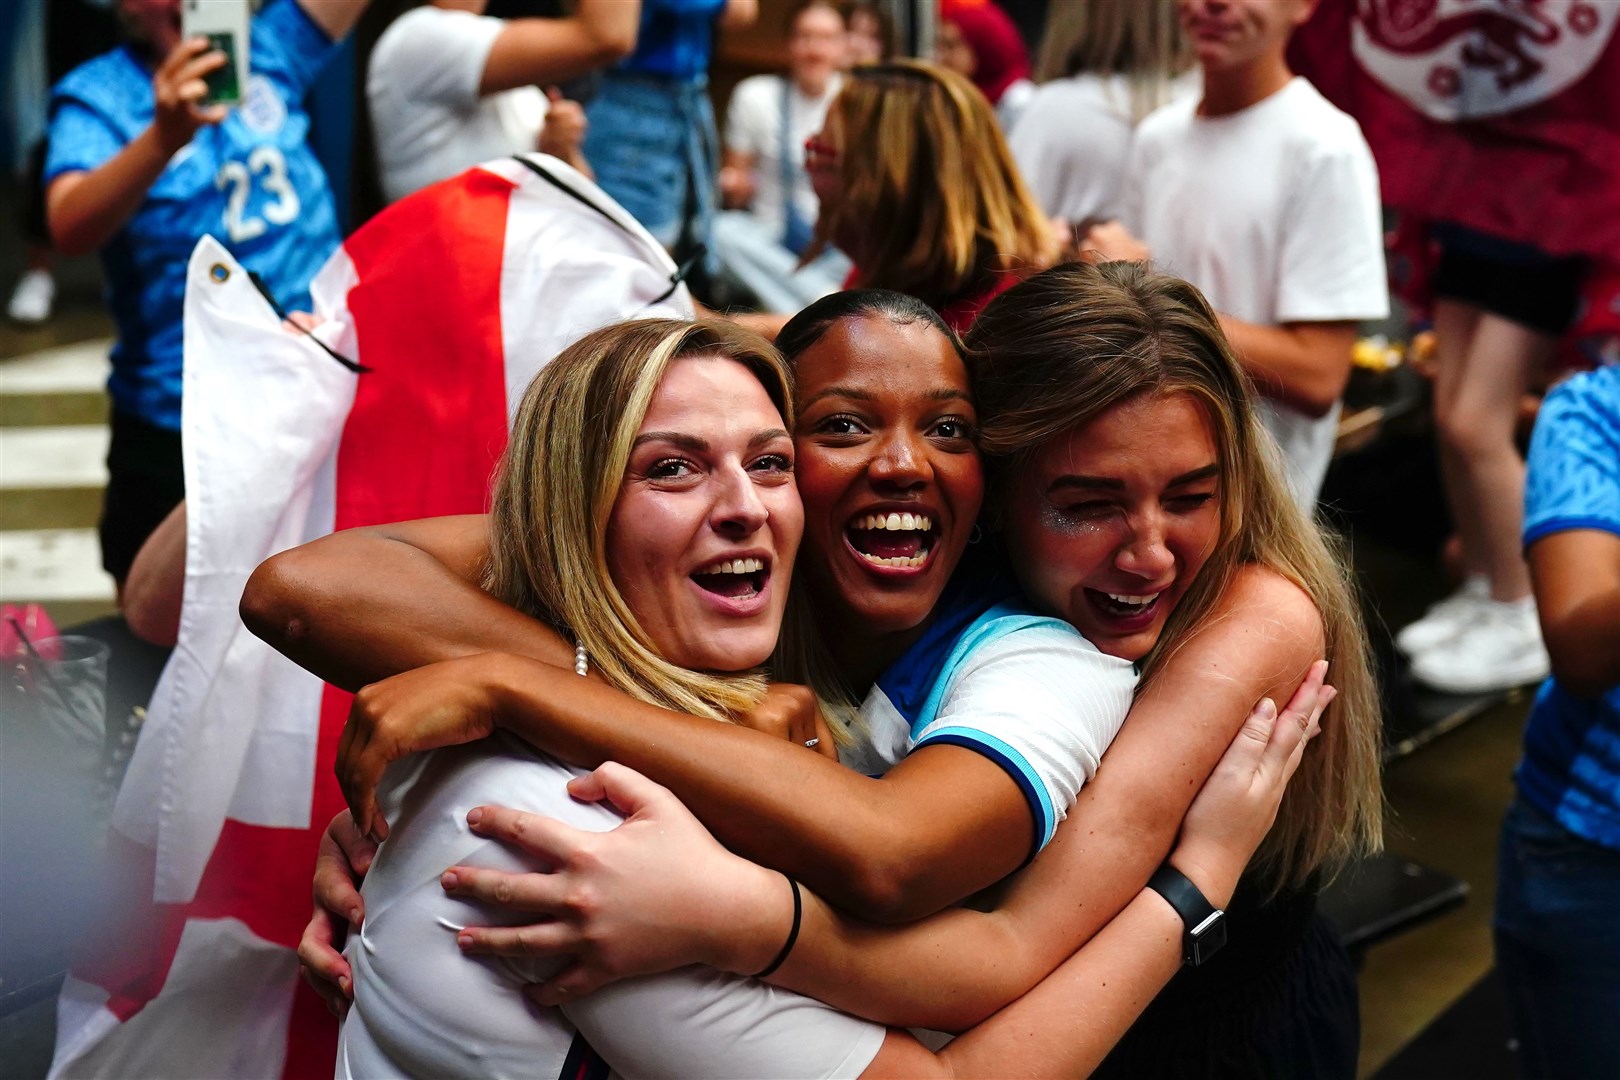 Fans hugged and celebrated as the Lionesses reached the final (Victoria Jones/PA)